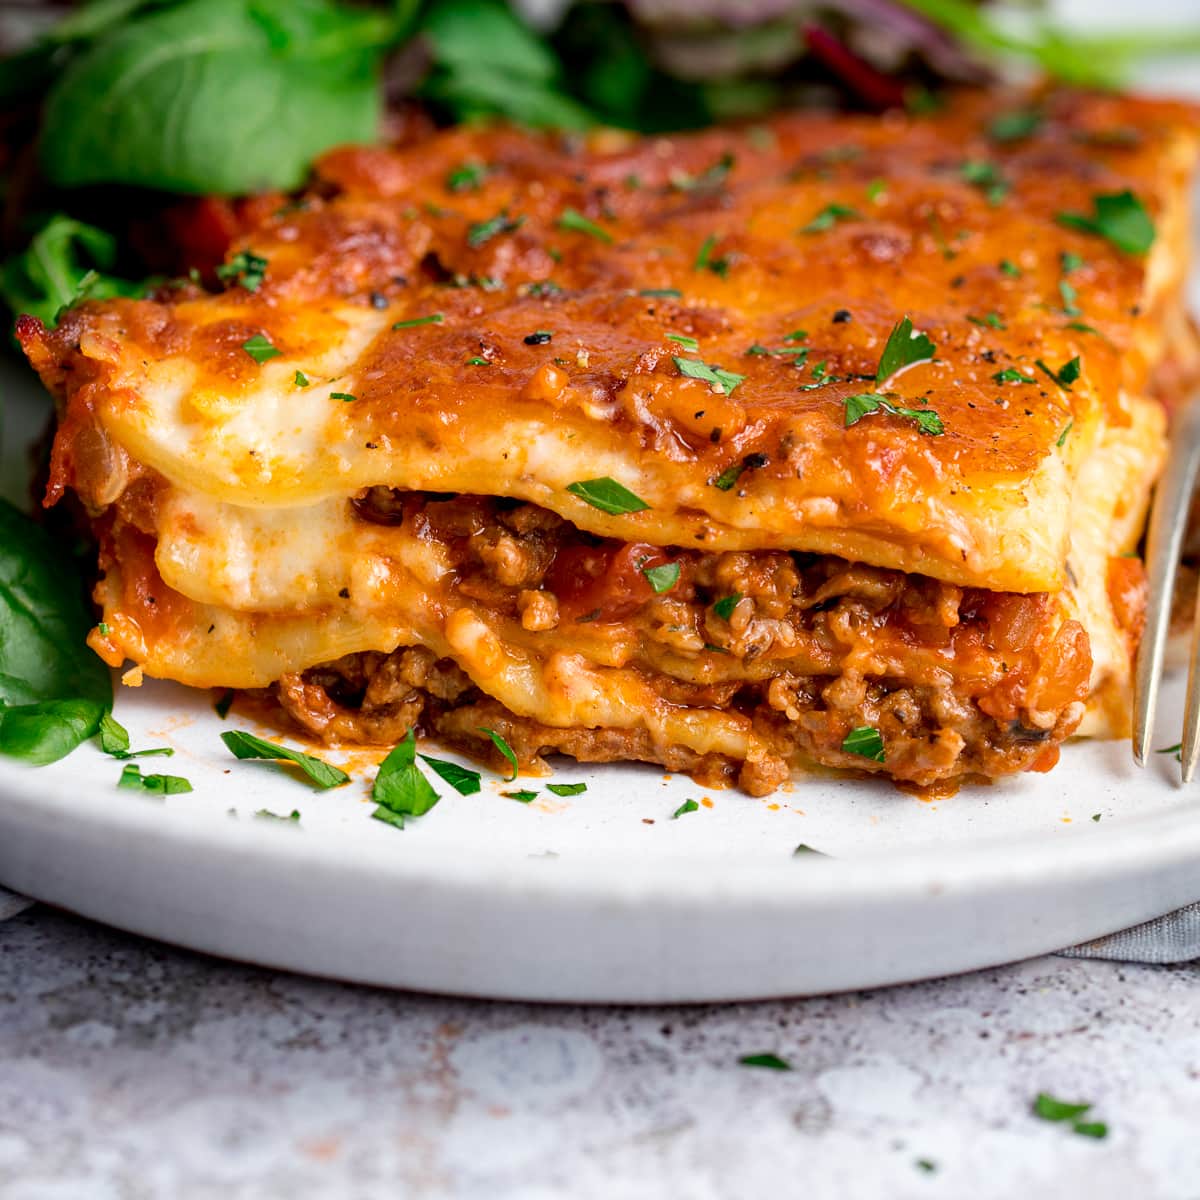 Homemade Meat Lasagna from Scratch